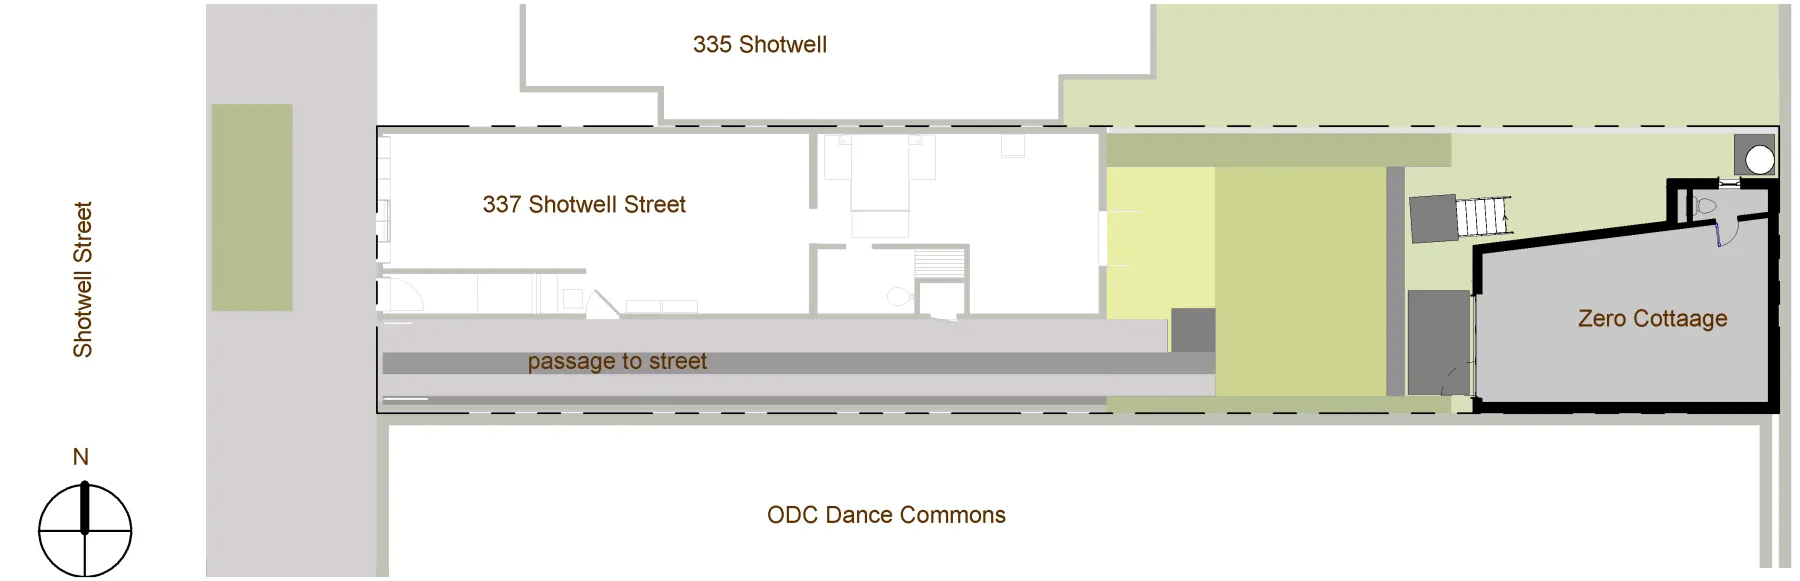 Site plan for Zero Cottage and the Shotwell compound in San Francisco.